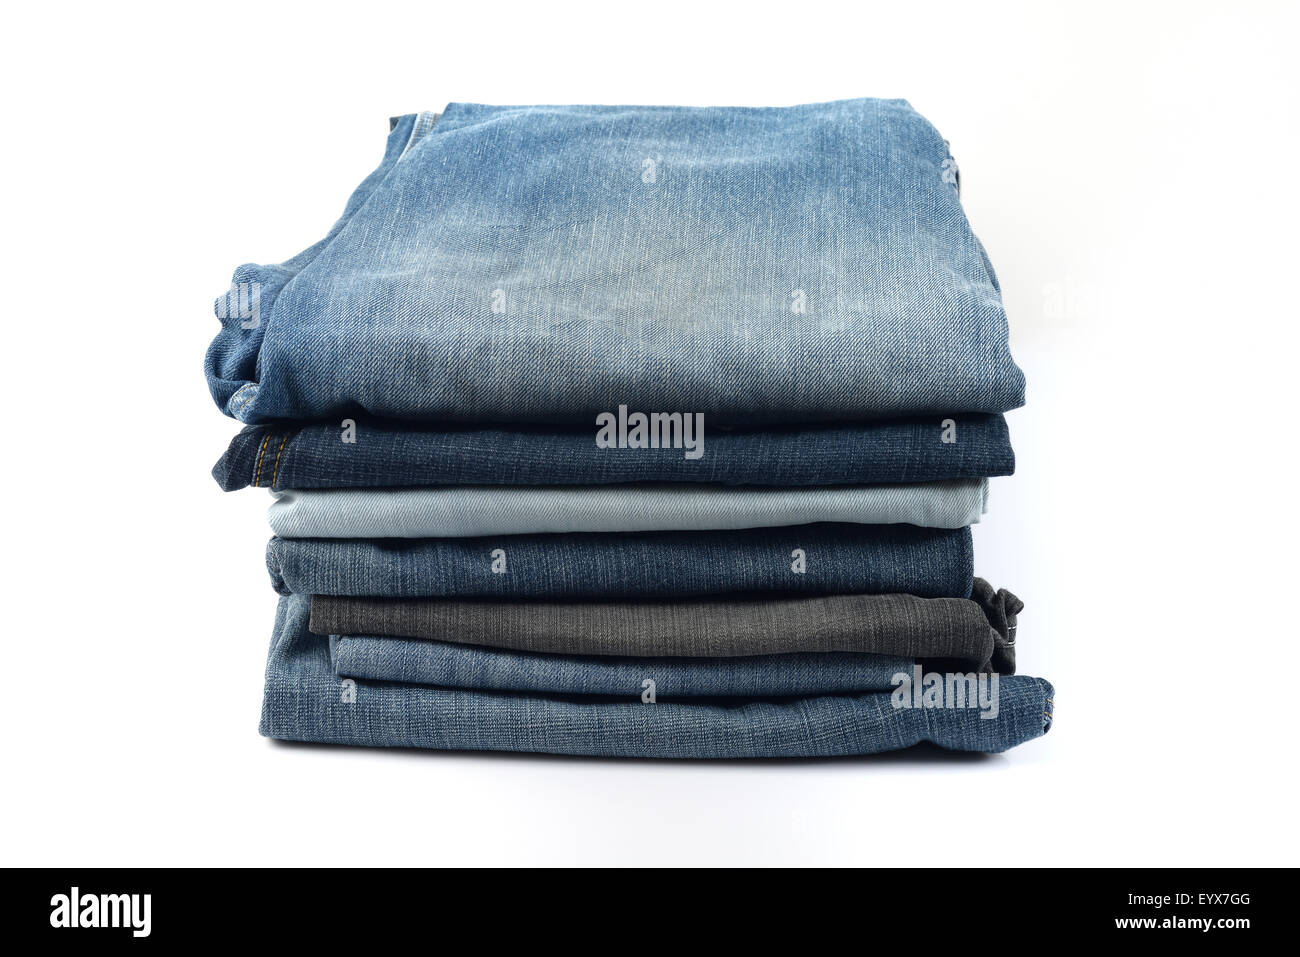 Stack of Blue and Black Denims on White Background, Stock Photo